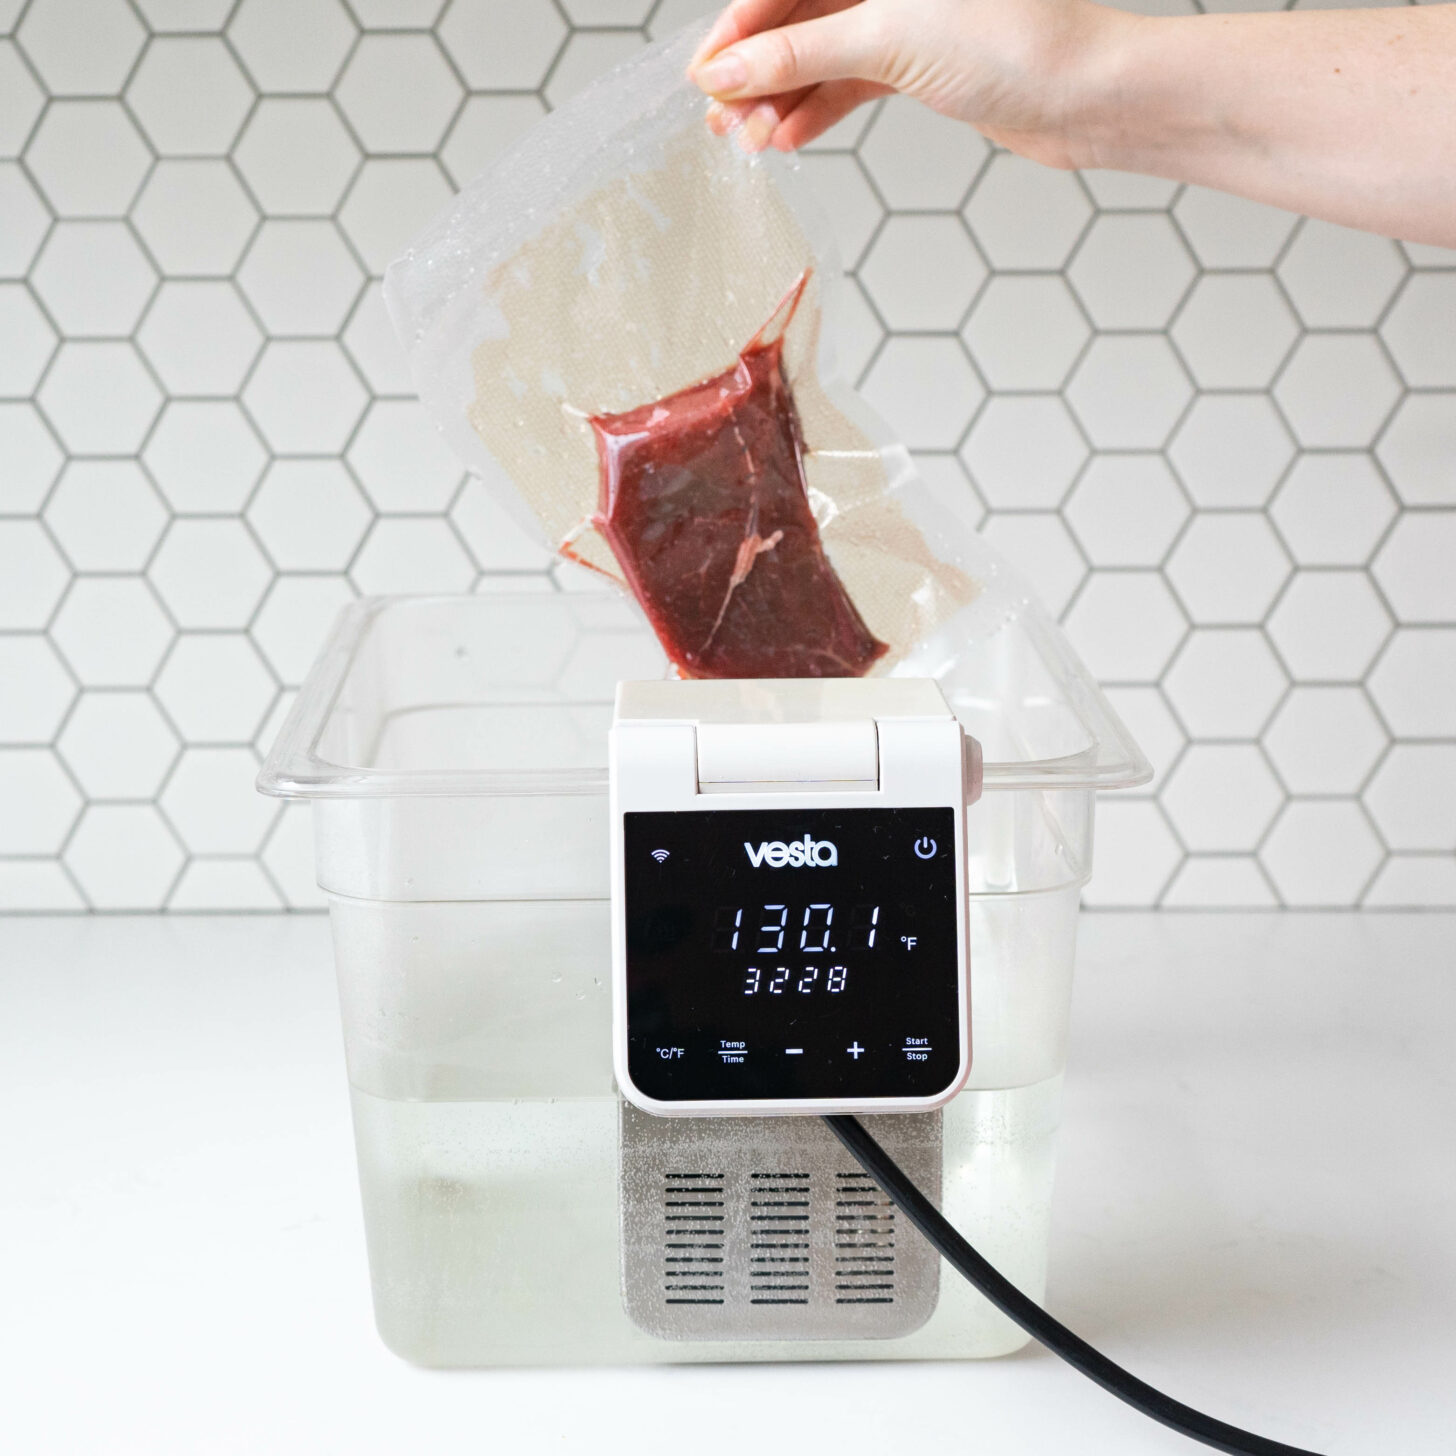 specificere Lyn aborre What's Better for Steak? Sous Vide vs. Grill - A Duck's Oven